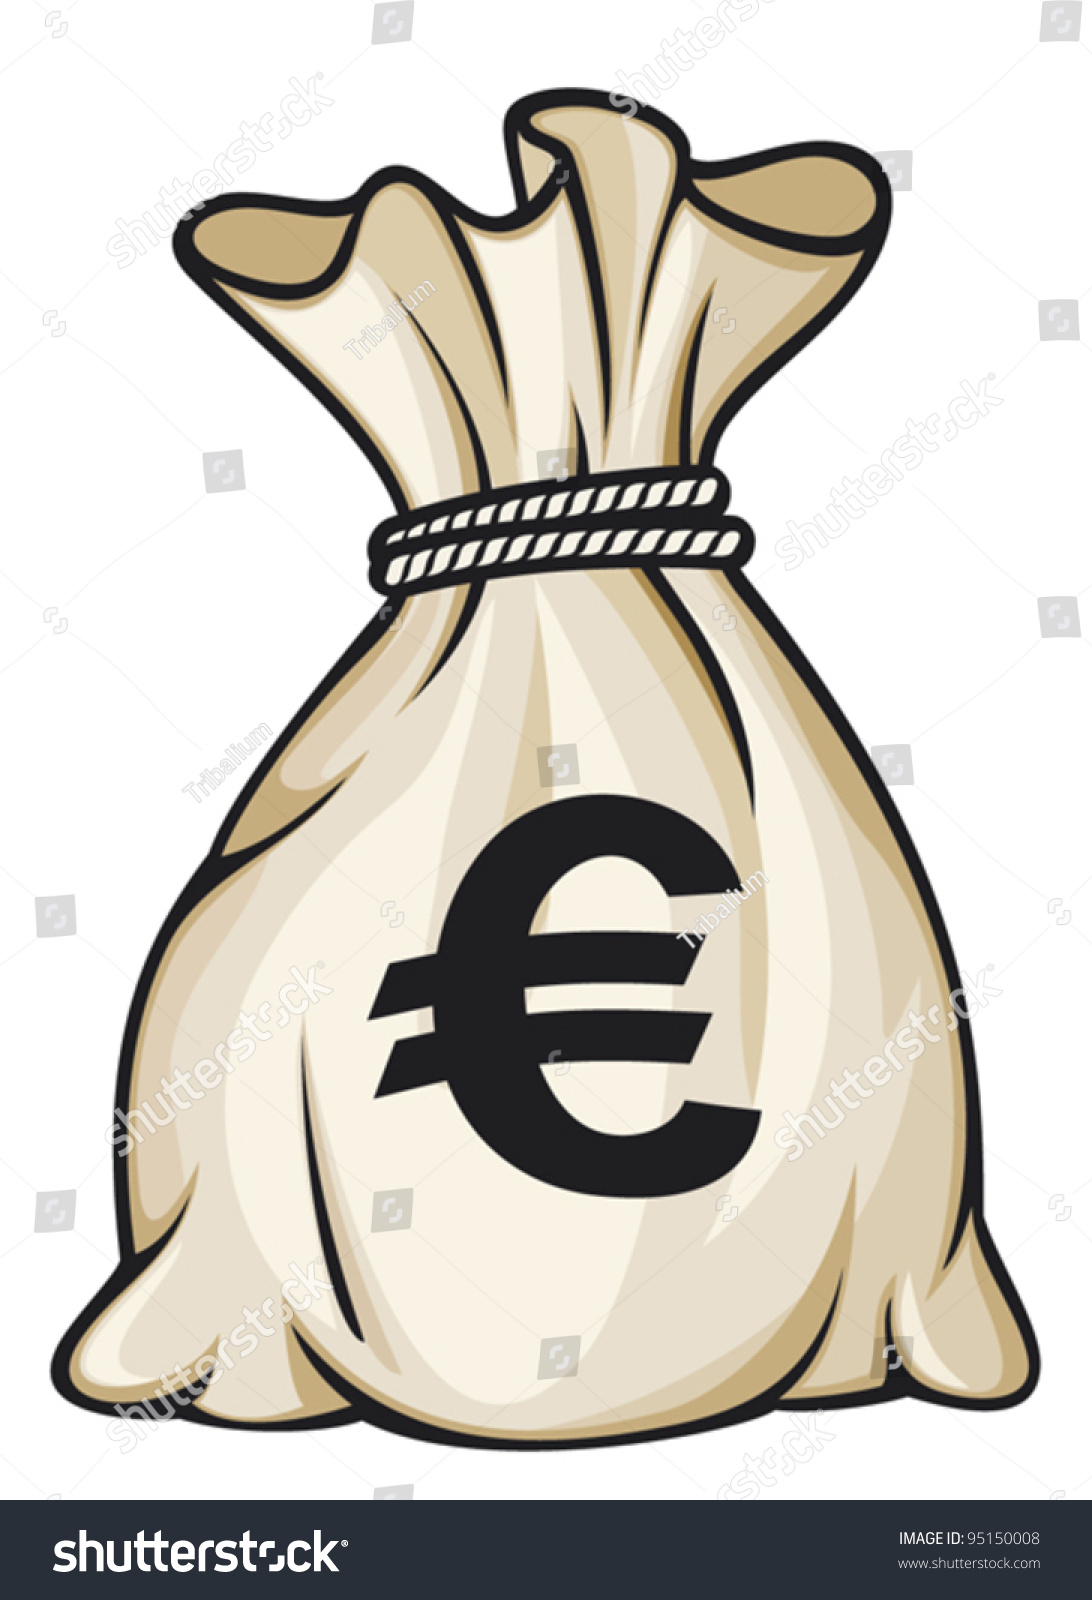 free clipart euro sign - photo #33